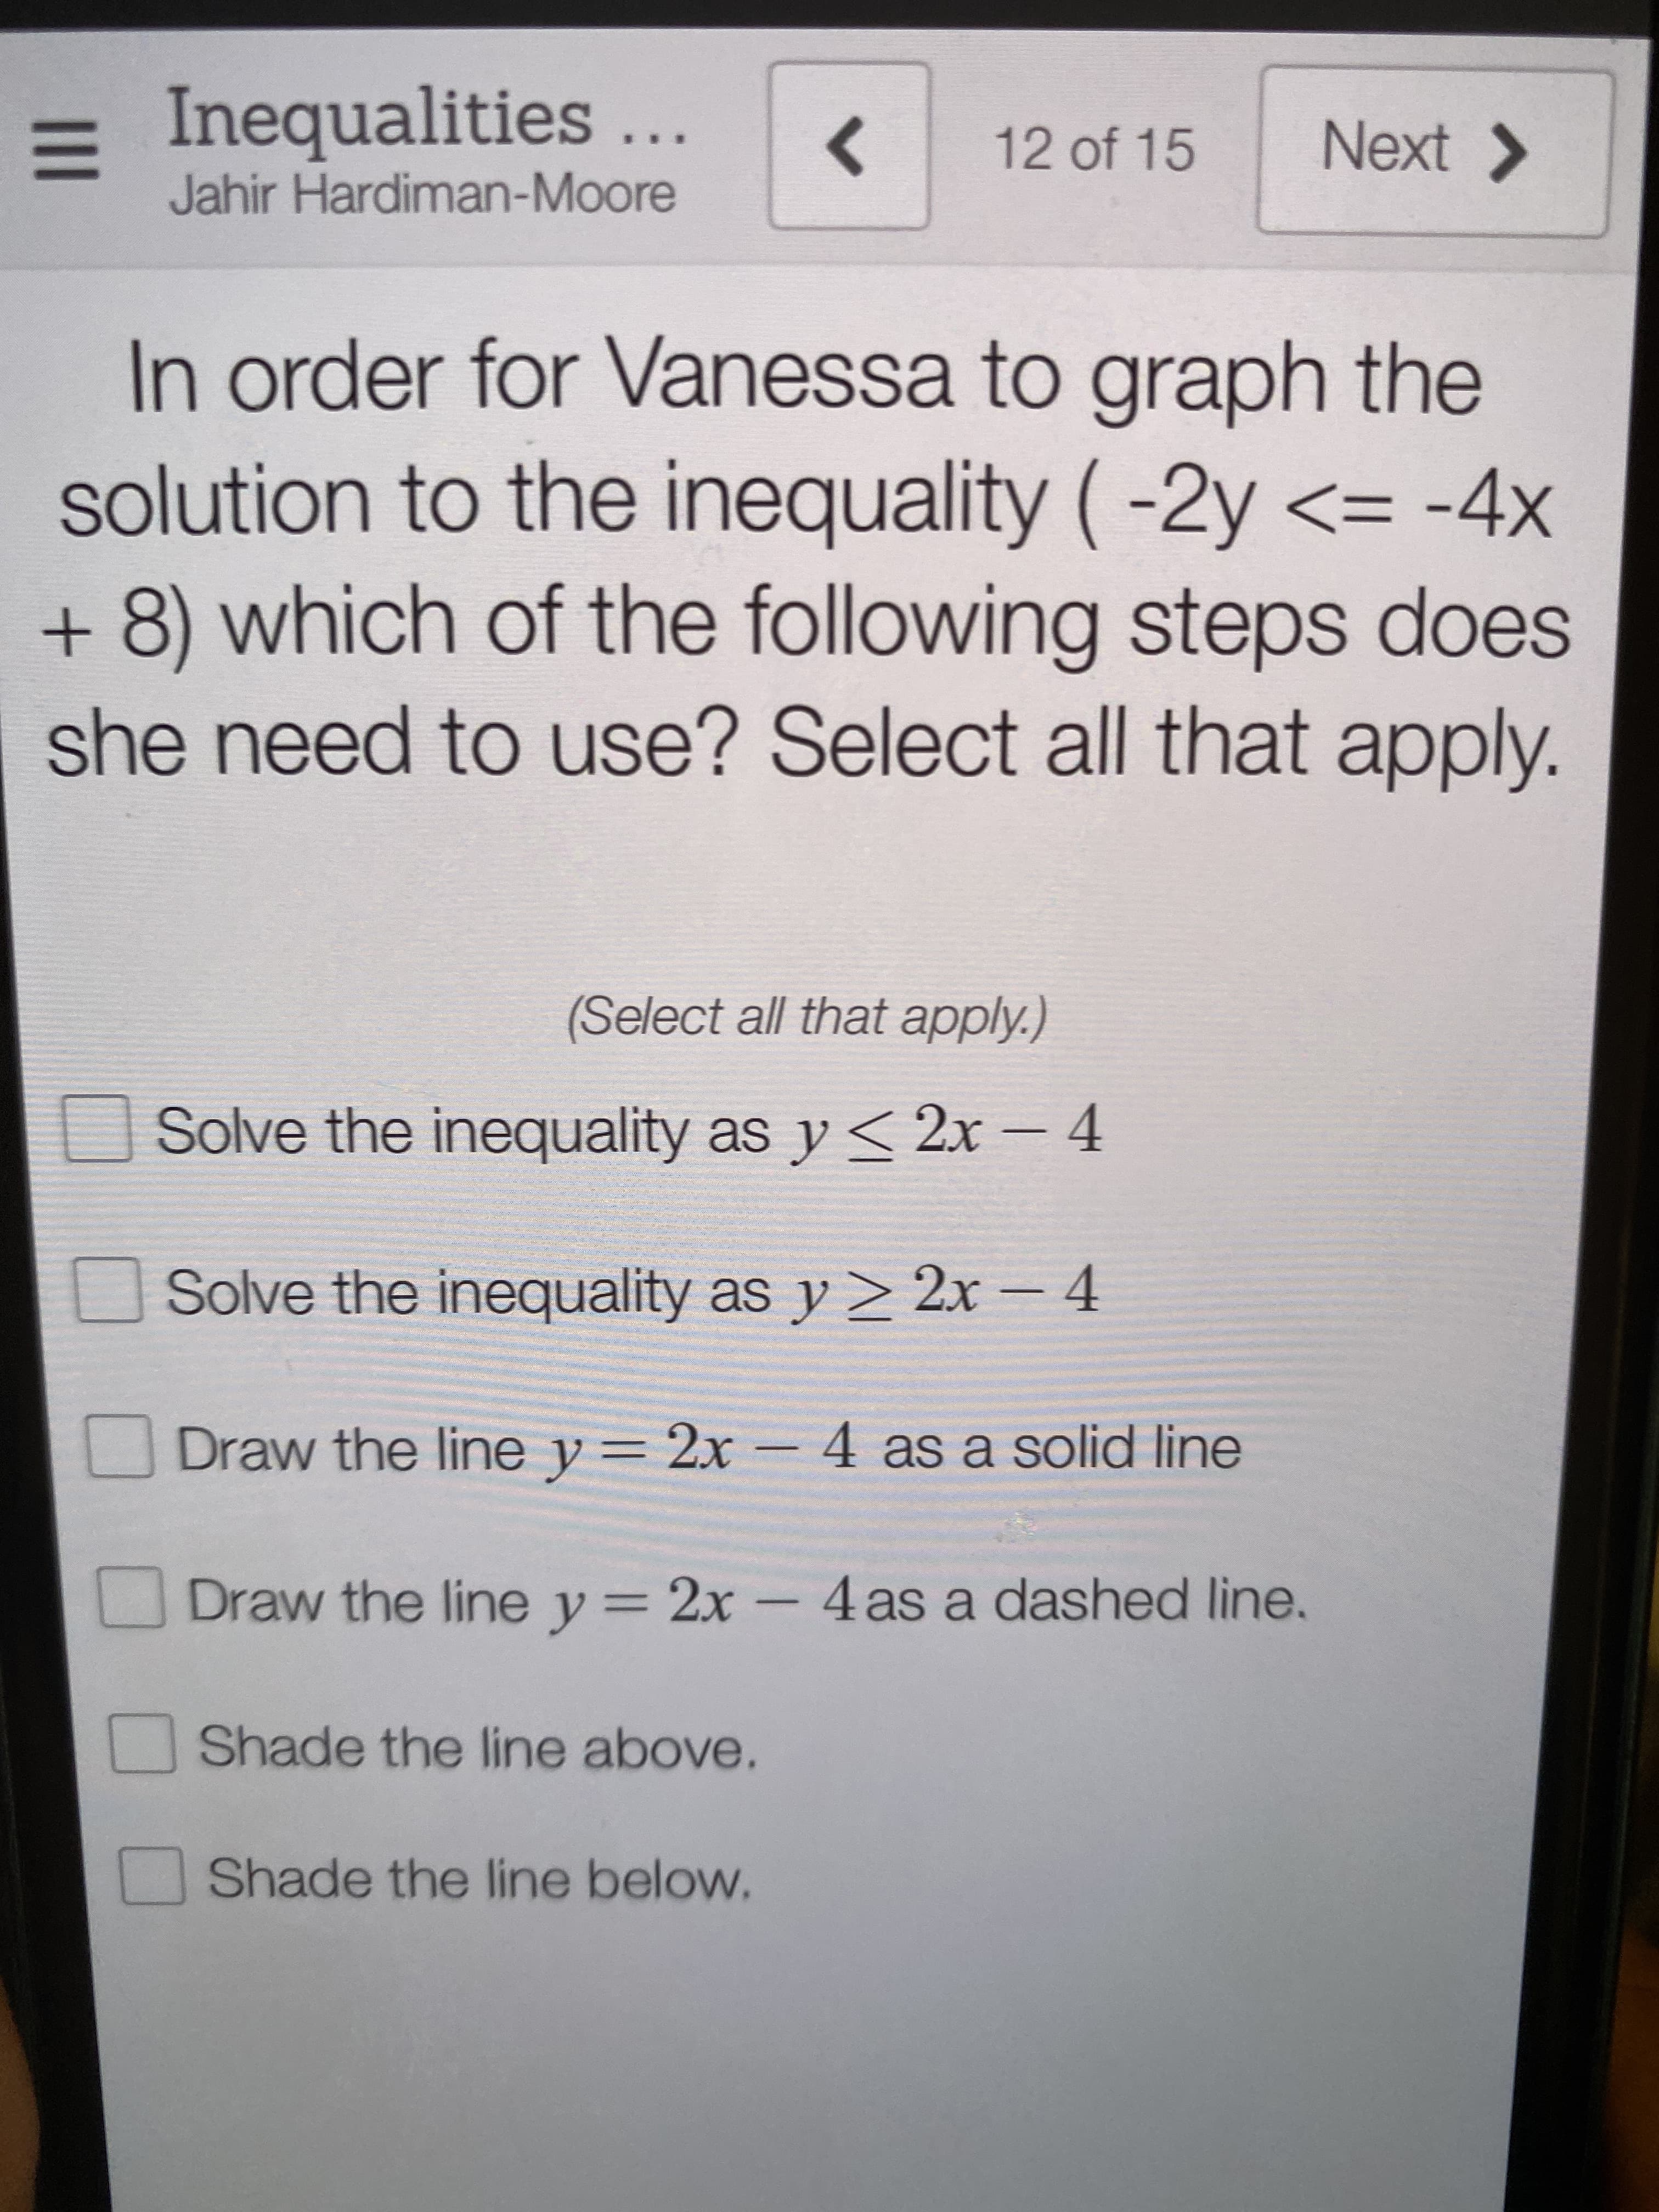 In order for Vanessa to graph the
solution to the inequality (-2y <= -4x
+ 8) which of the following steps does
she need to use? Select all that apply.
